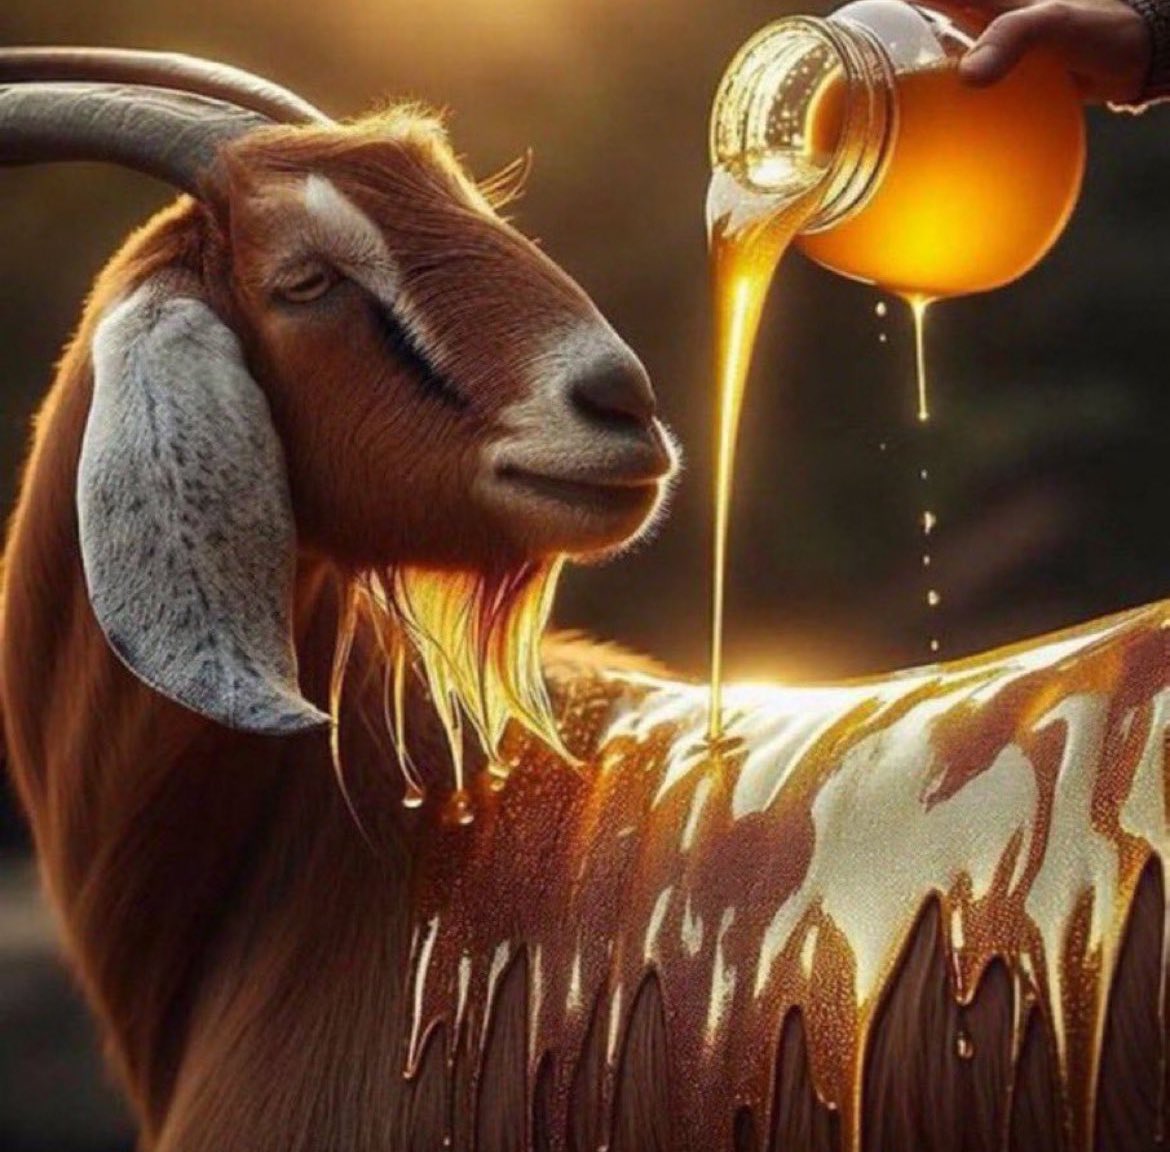 I’m pouring so much honey on you goat